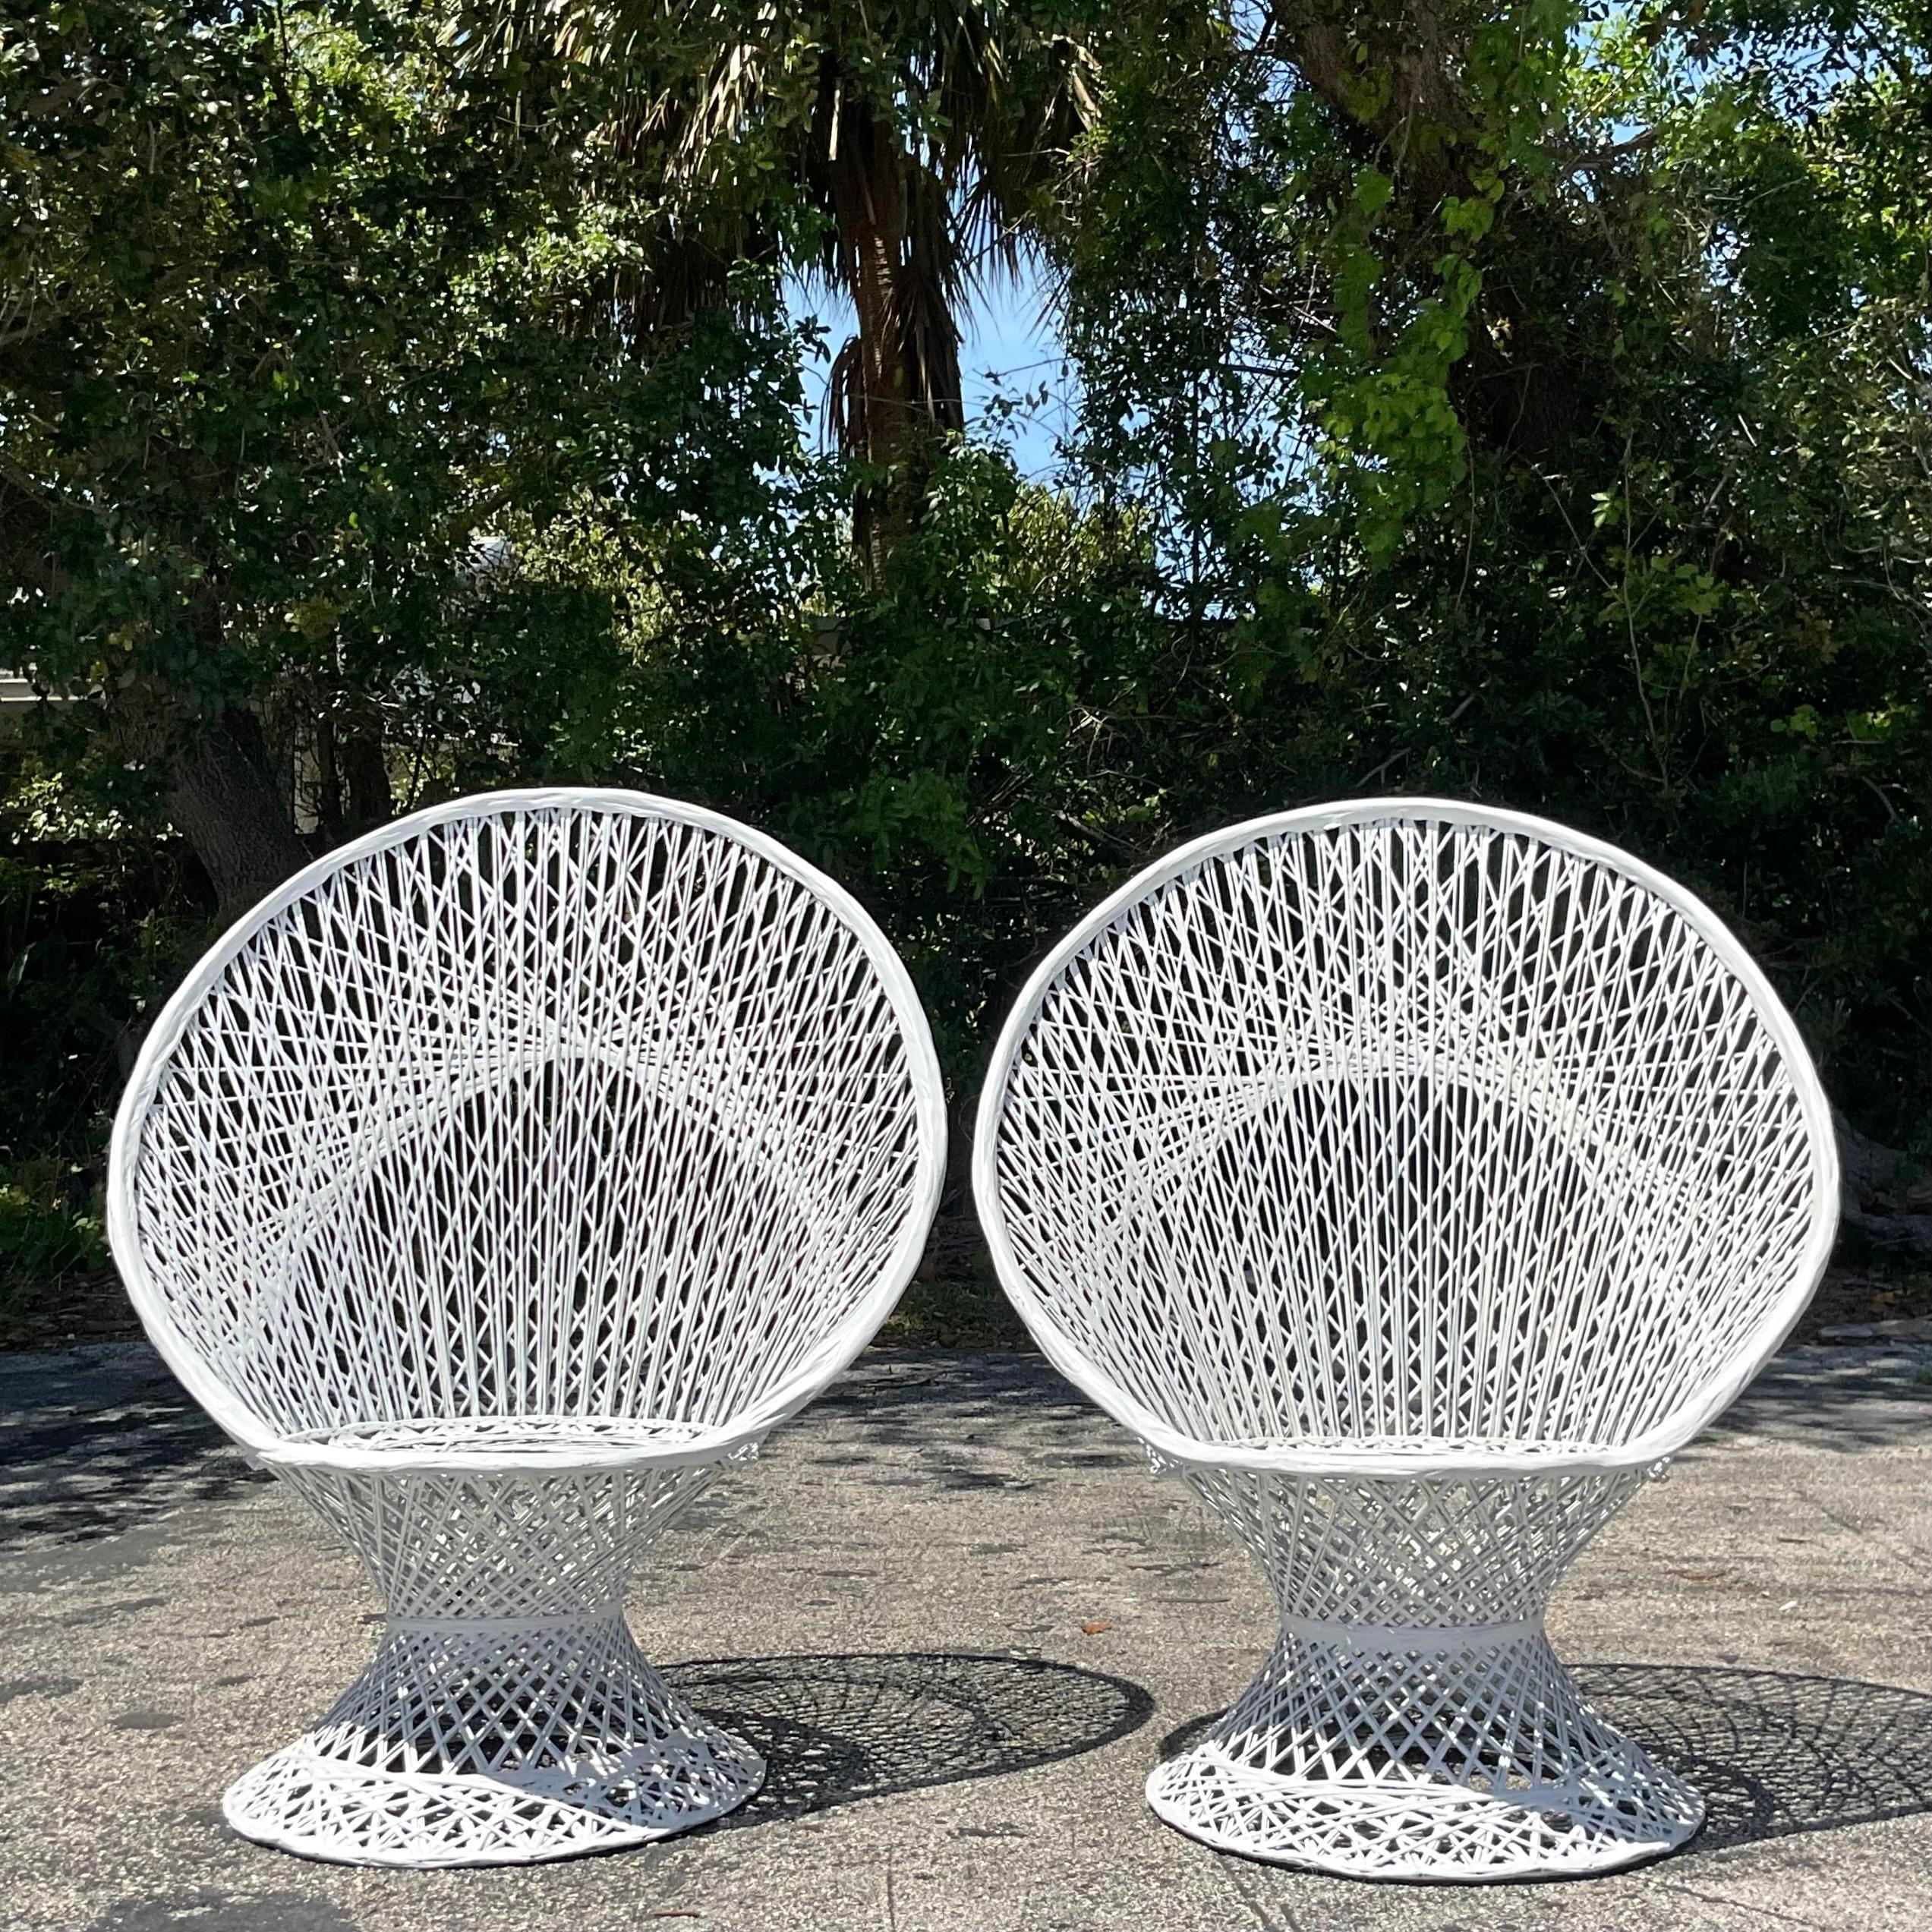 Experience mid-century modern flair with our Vintage MCM Spun Fiberglass Peacock Chairs - Pair of 2. These iconic chairs boast a striking peacock design crafted from spun fiberglass, blending retro charm with American design sensibility for a